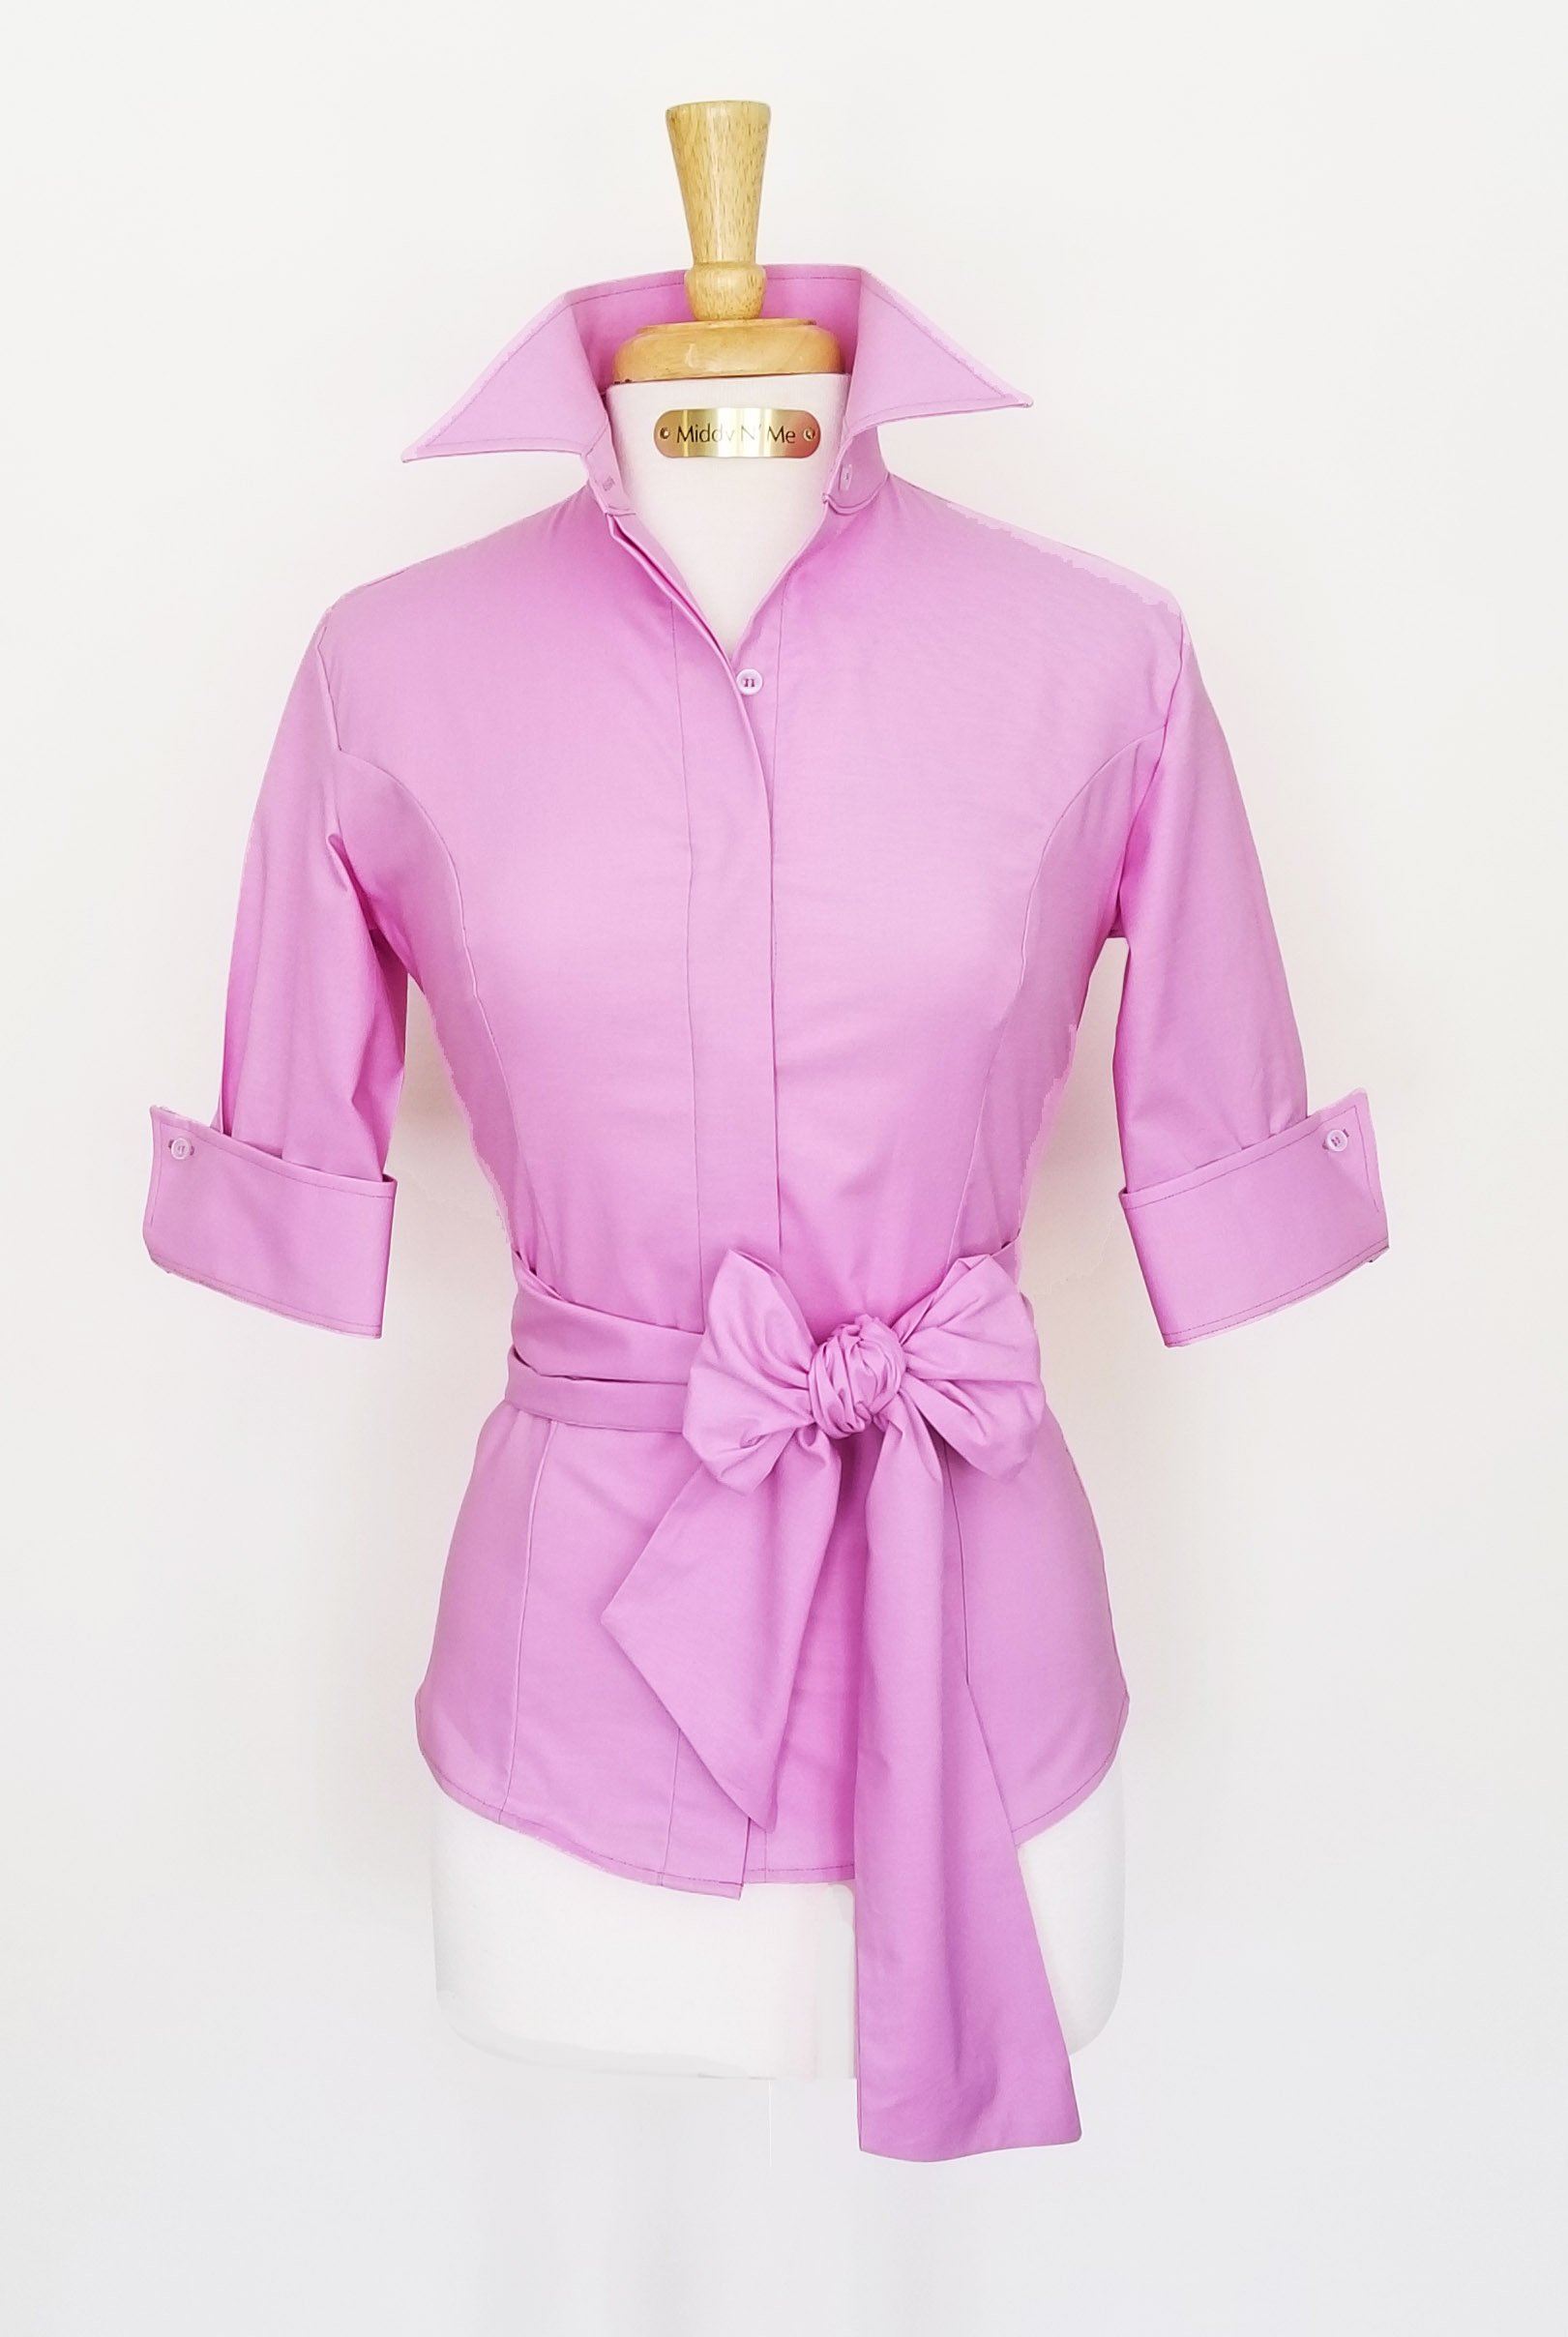 SUMMER RIDE SHIRT WITH SASH IN BALLERINA - Middy N' Me